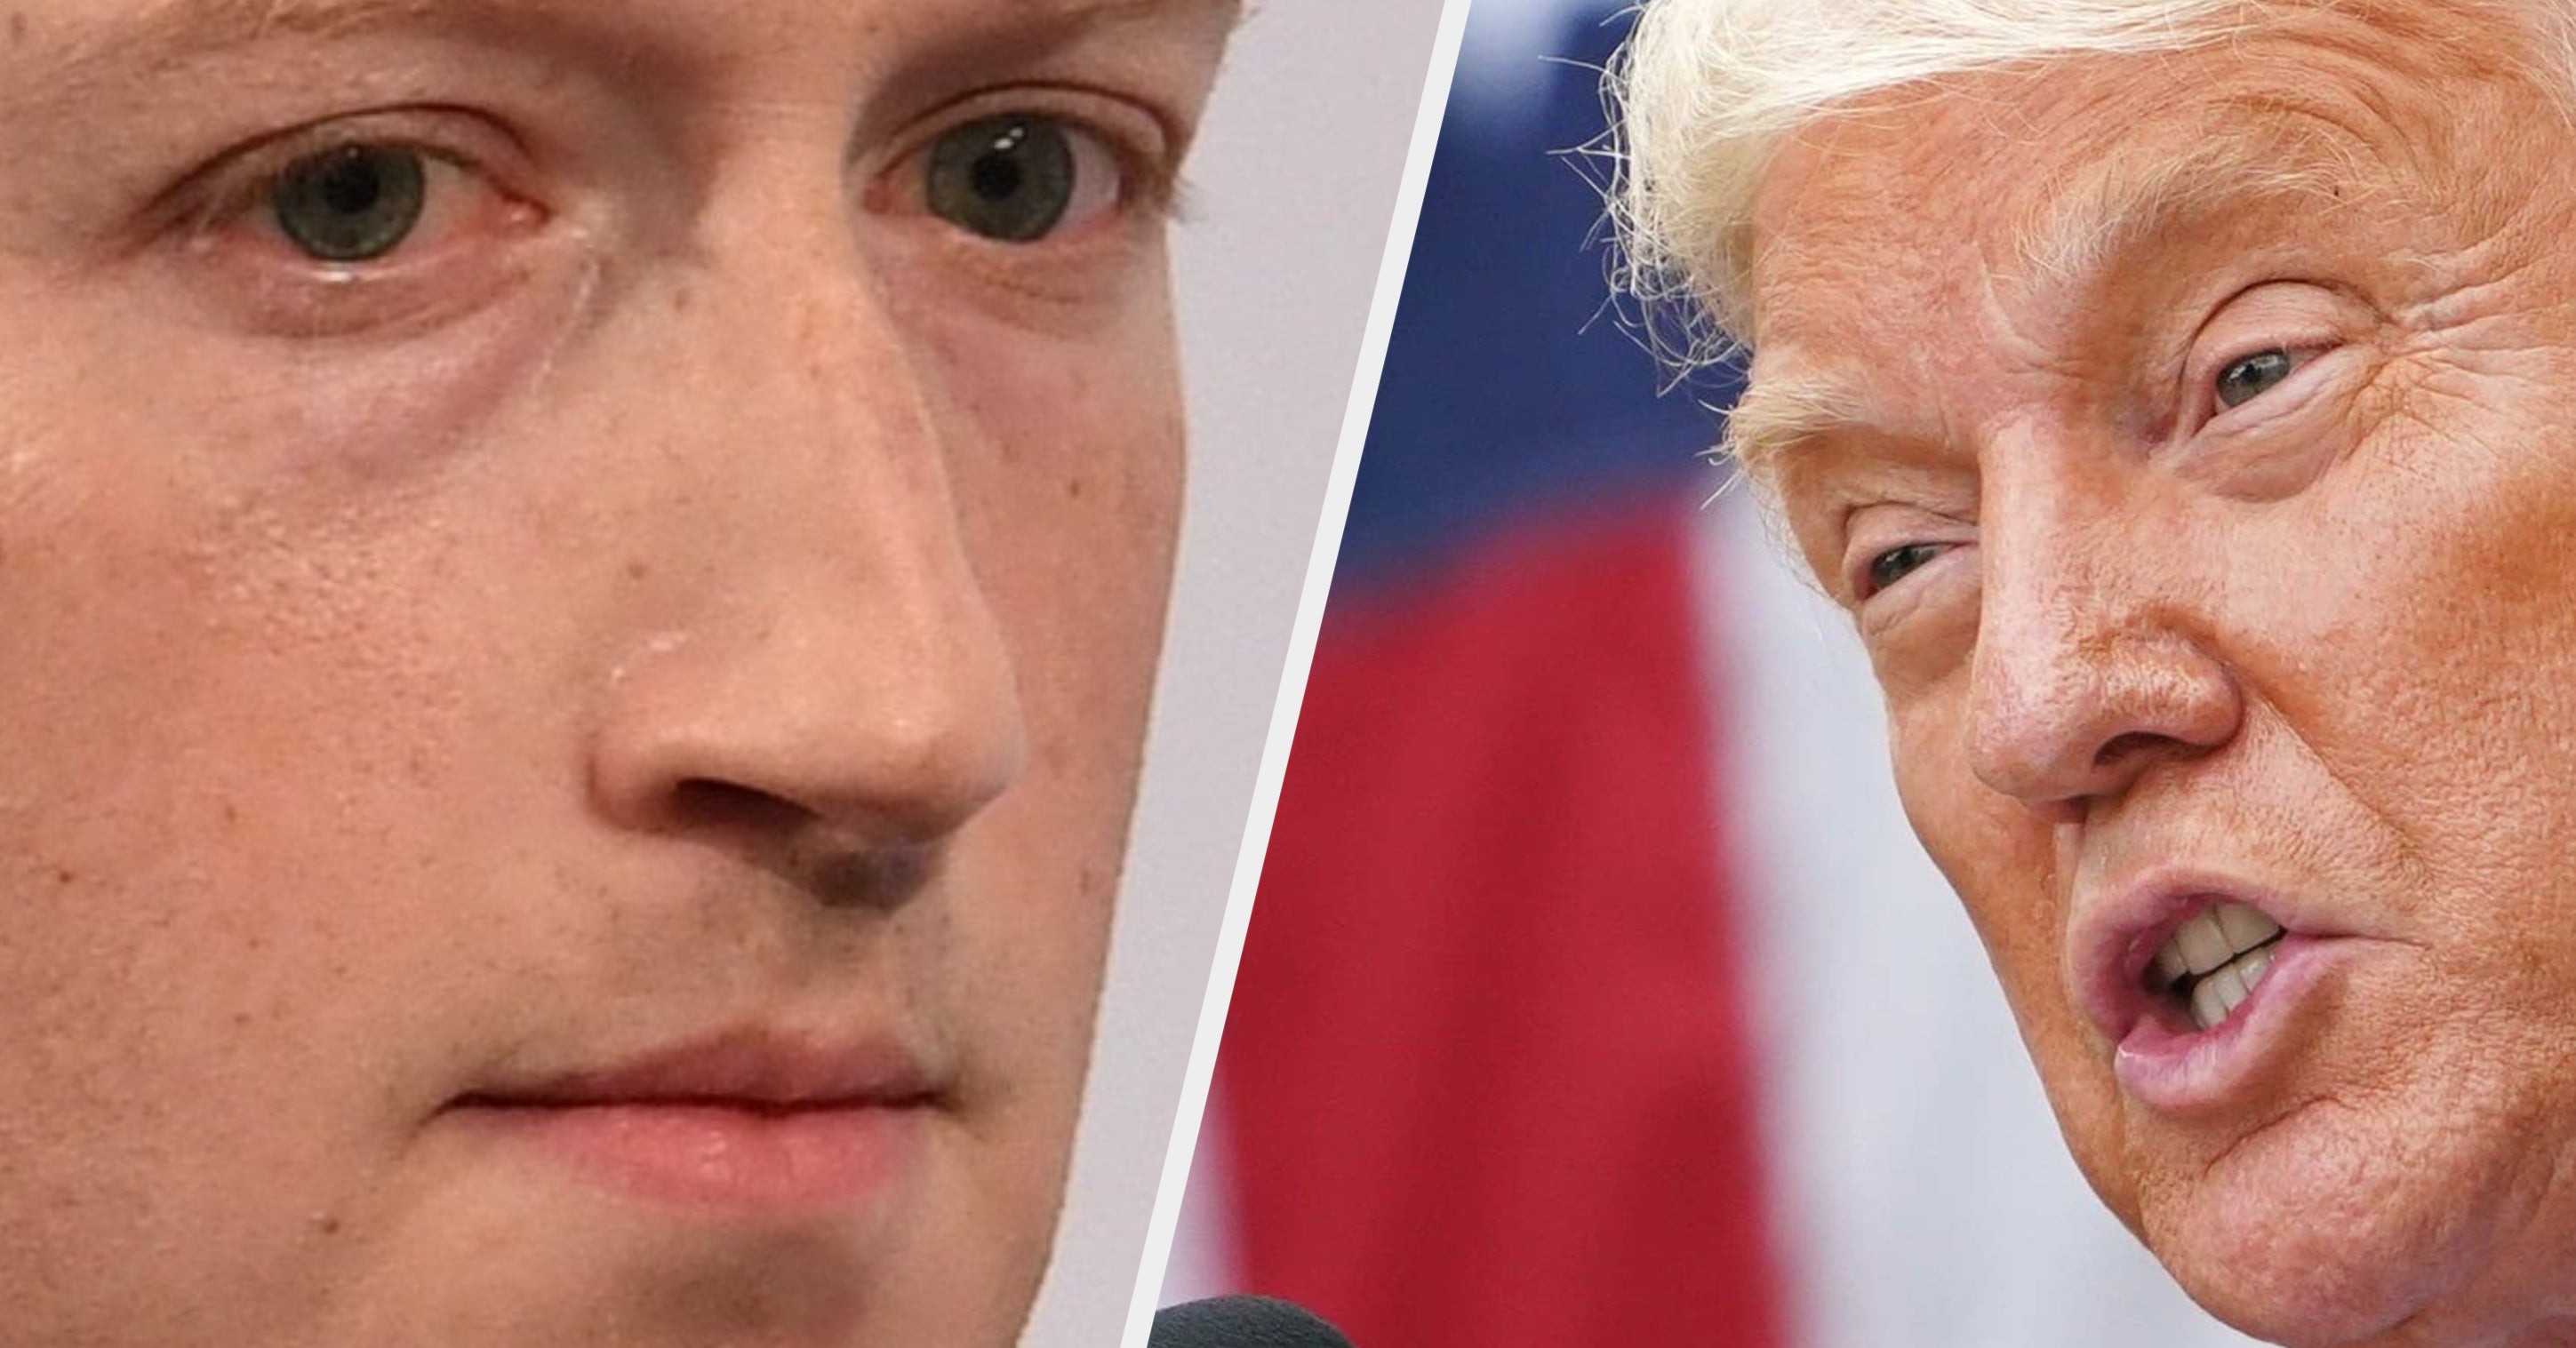 The Biden Campaign Slammed Facebook For Refusing To Take Down Misleading Trump Posts